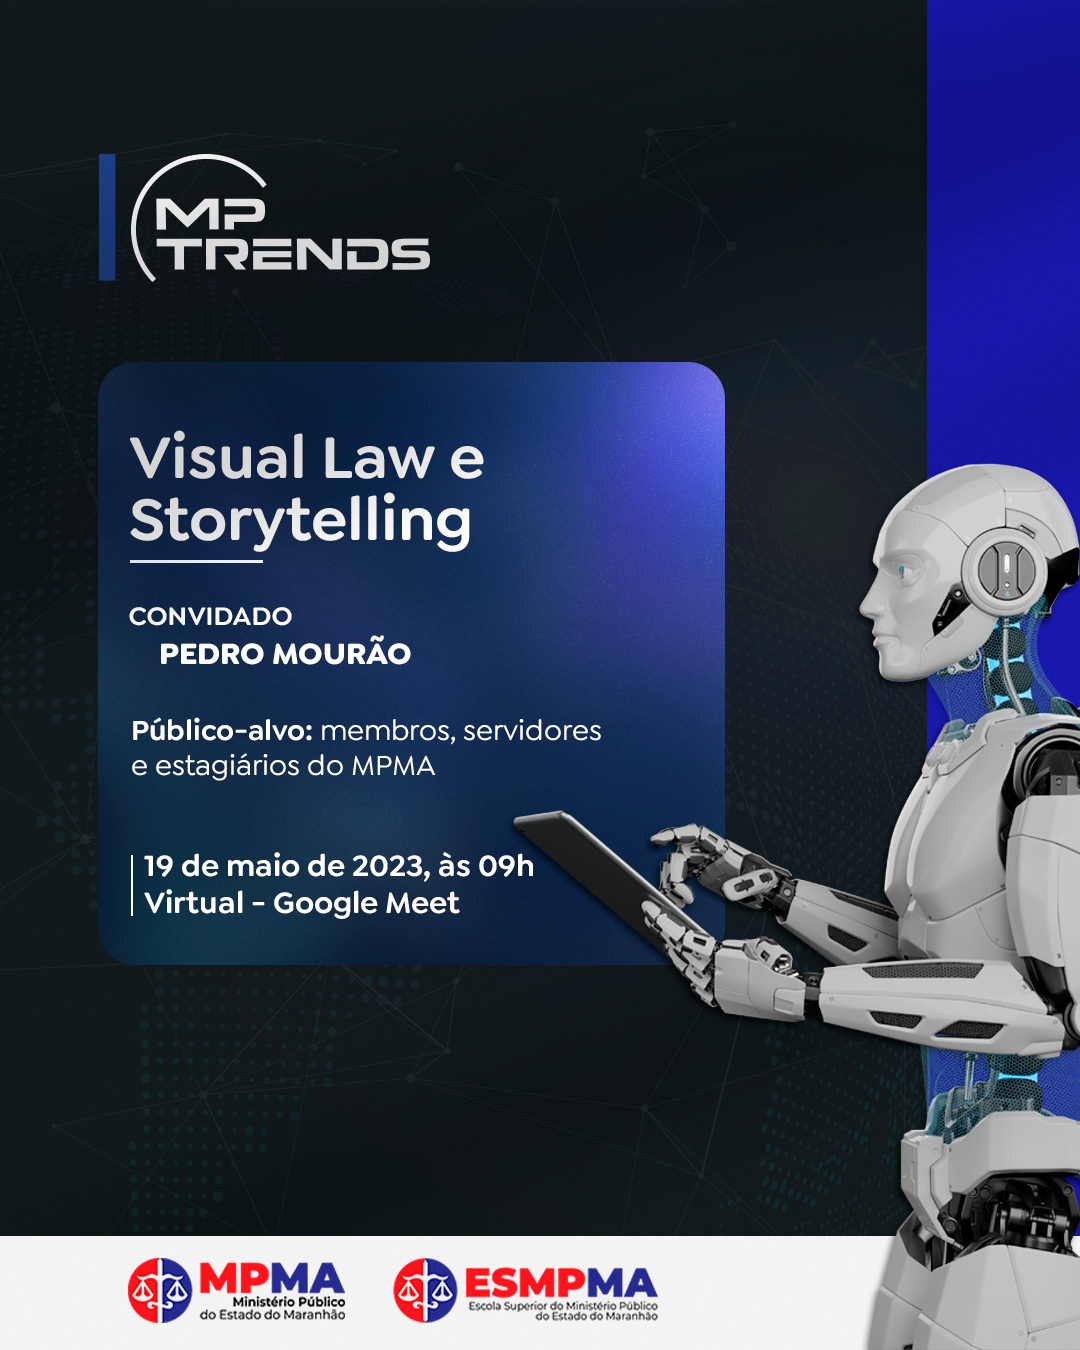 MP TRENDS: Visual Law e Storytelling